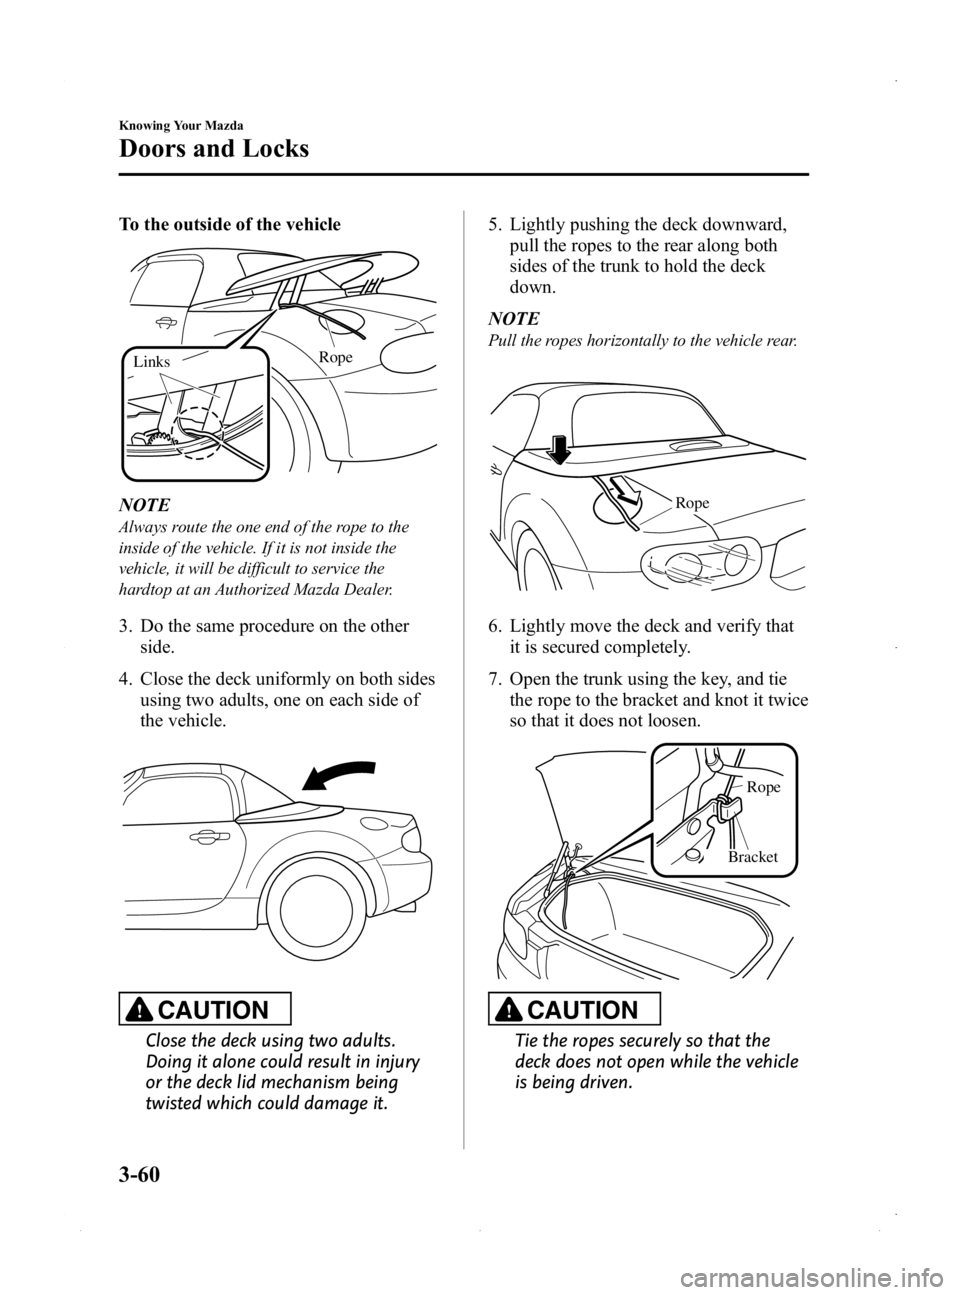 MAZDA MODEL MX-5 MIATA PRHT 2015  Owners Manual Black plate (114,1)
To the outside of the vehicle
Rope
Links
NOTE
Always route the one end of the rope to the
inside of the vehicle. If it is not inside the
vehicle, it will be difficult to service th